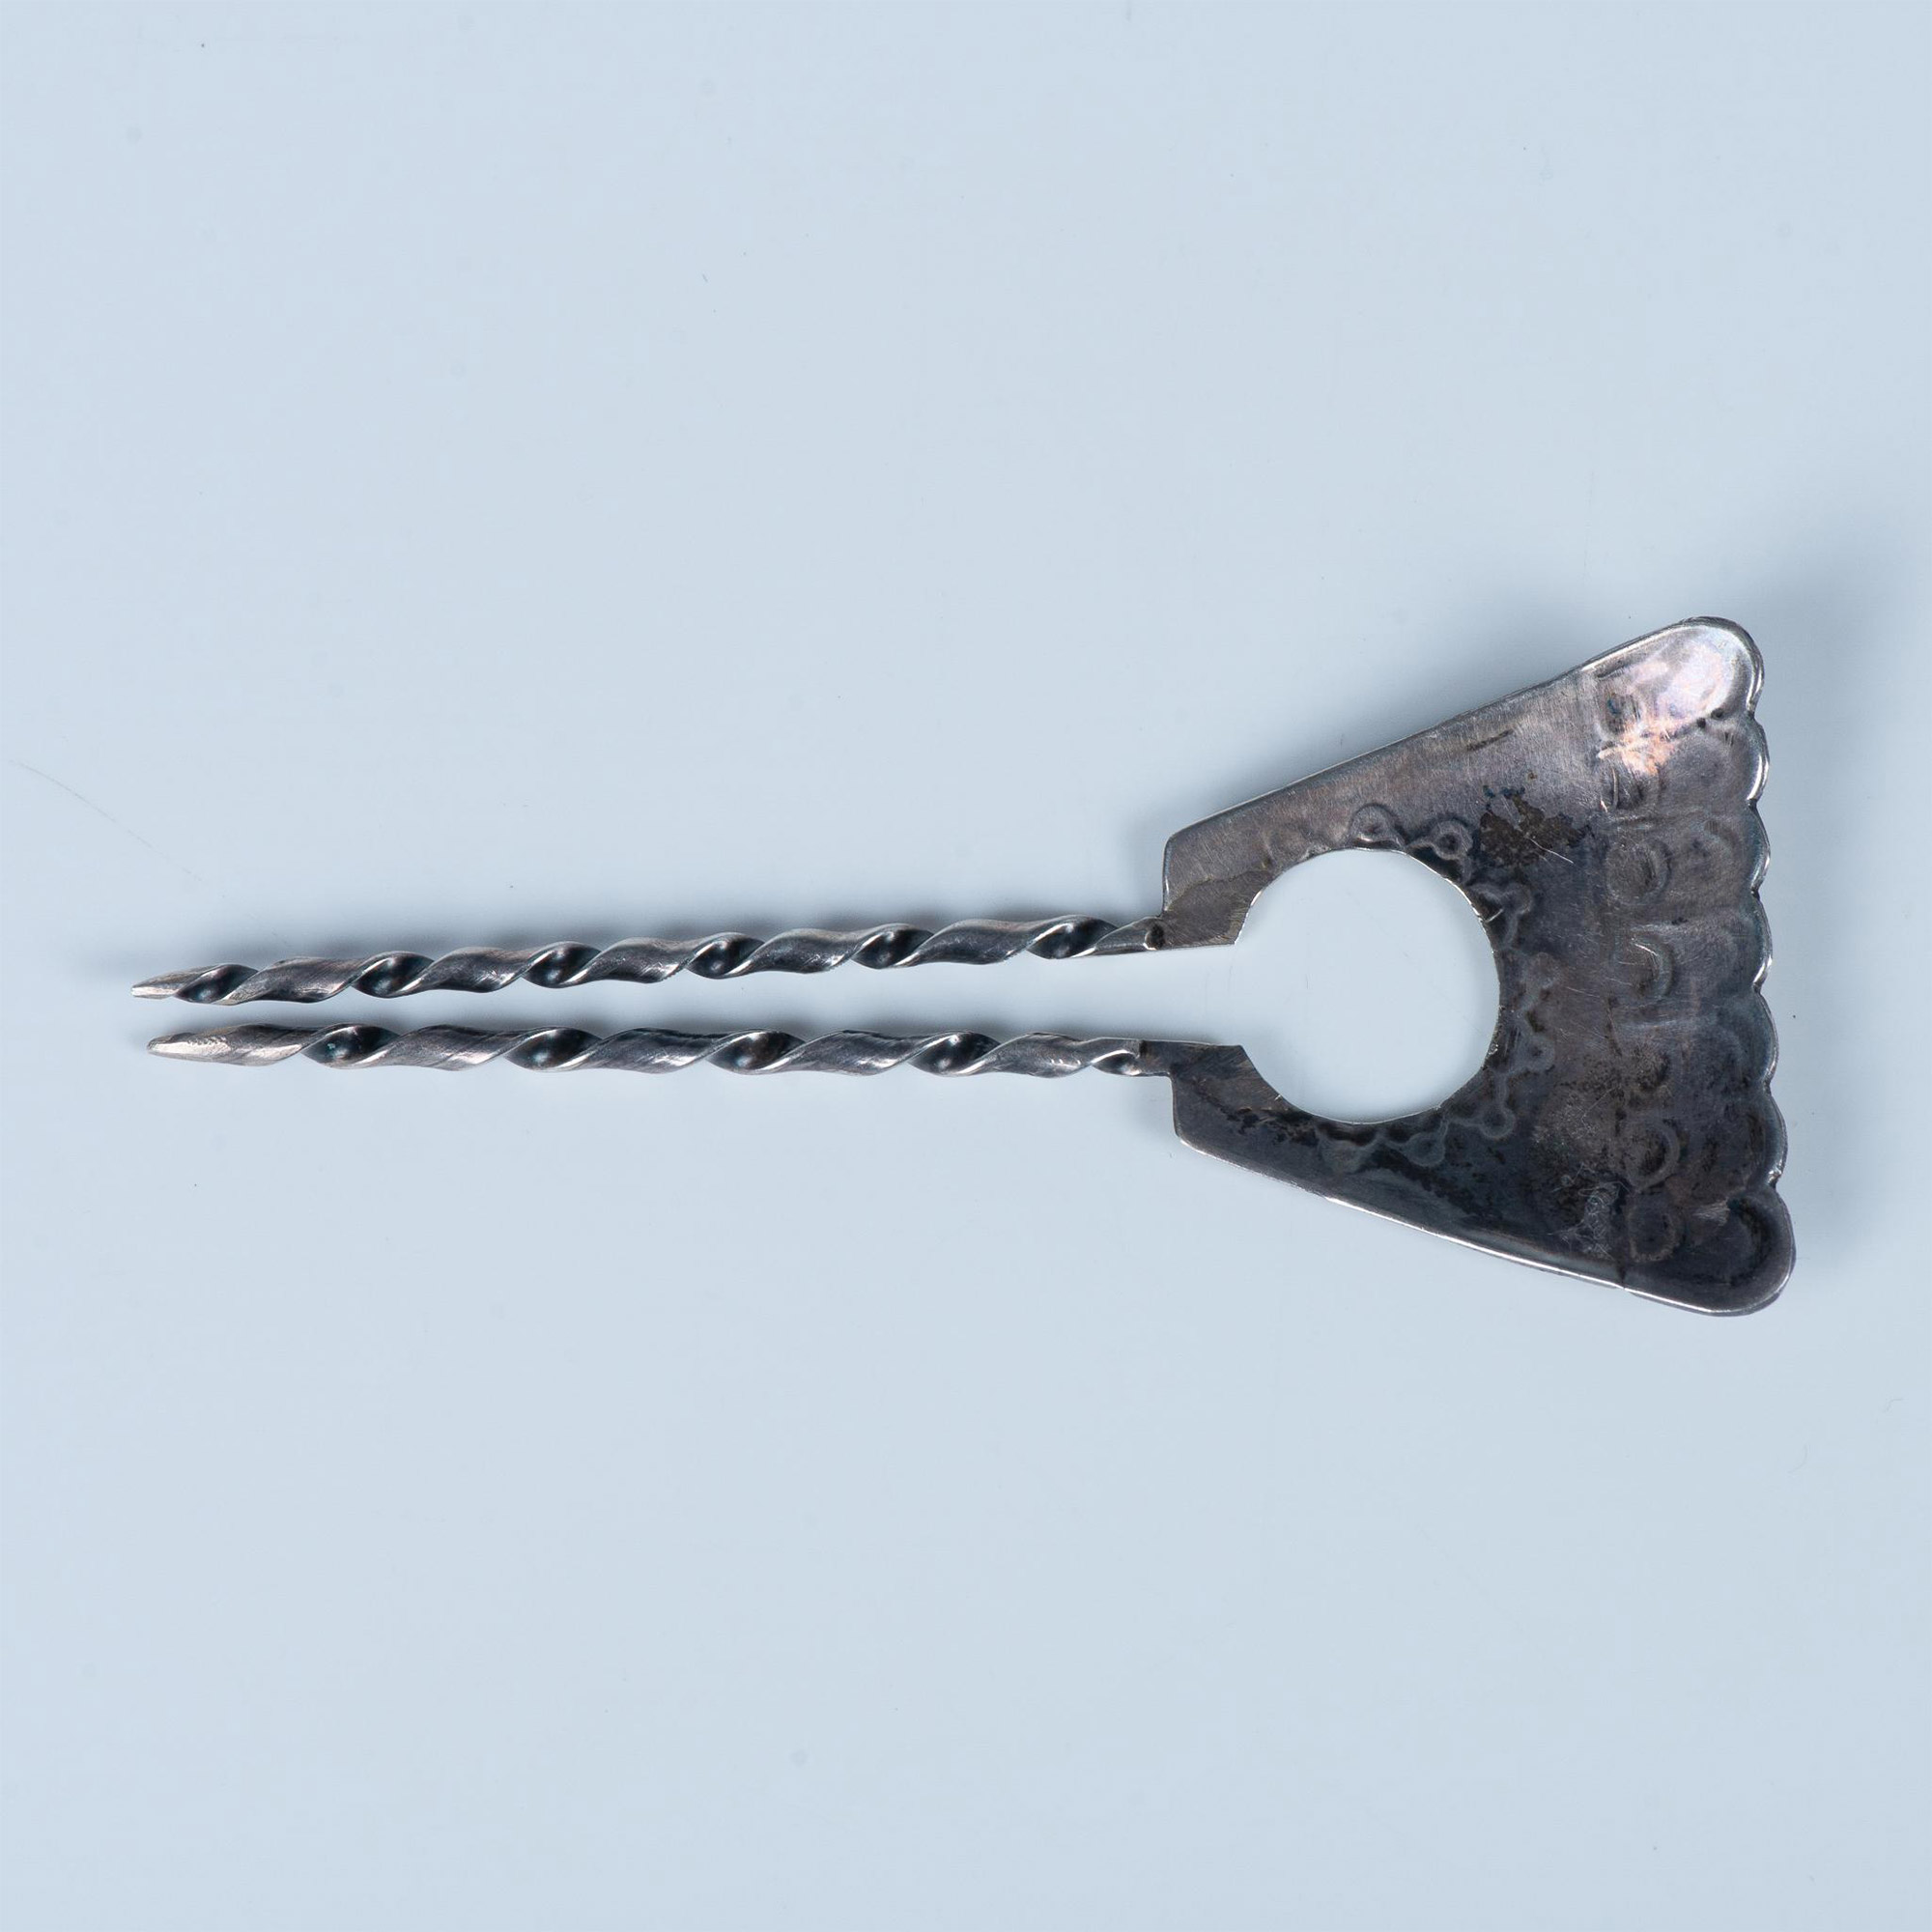 Native American Sterling Silver Two-Prong Hair Pin Ornament - Image 2 of 5